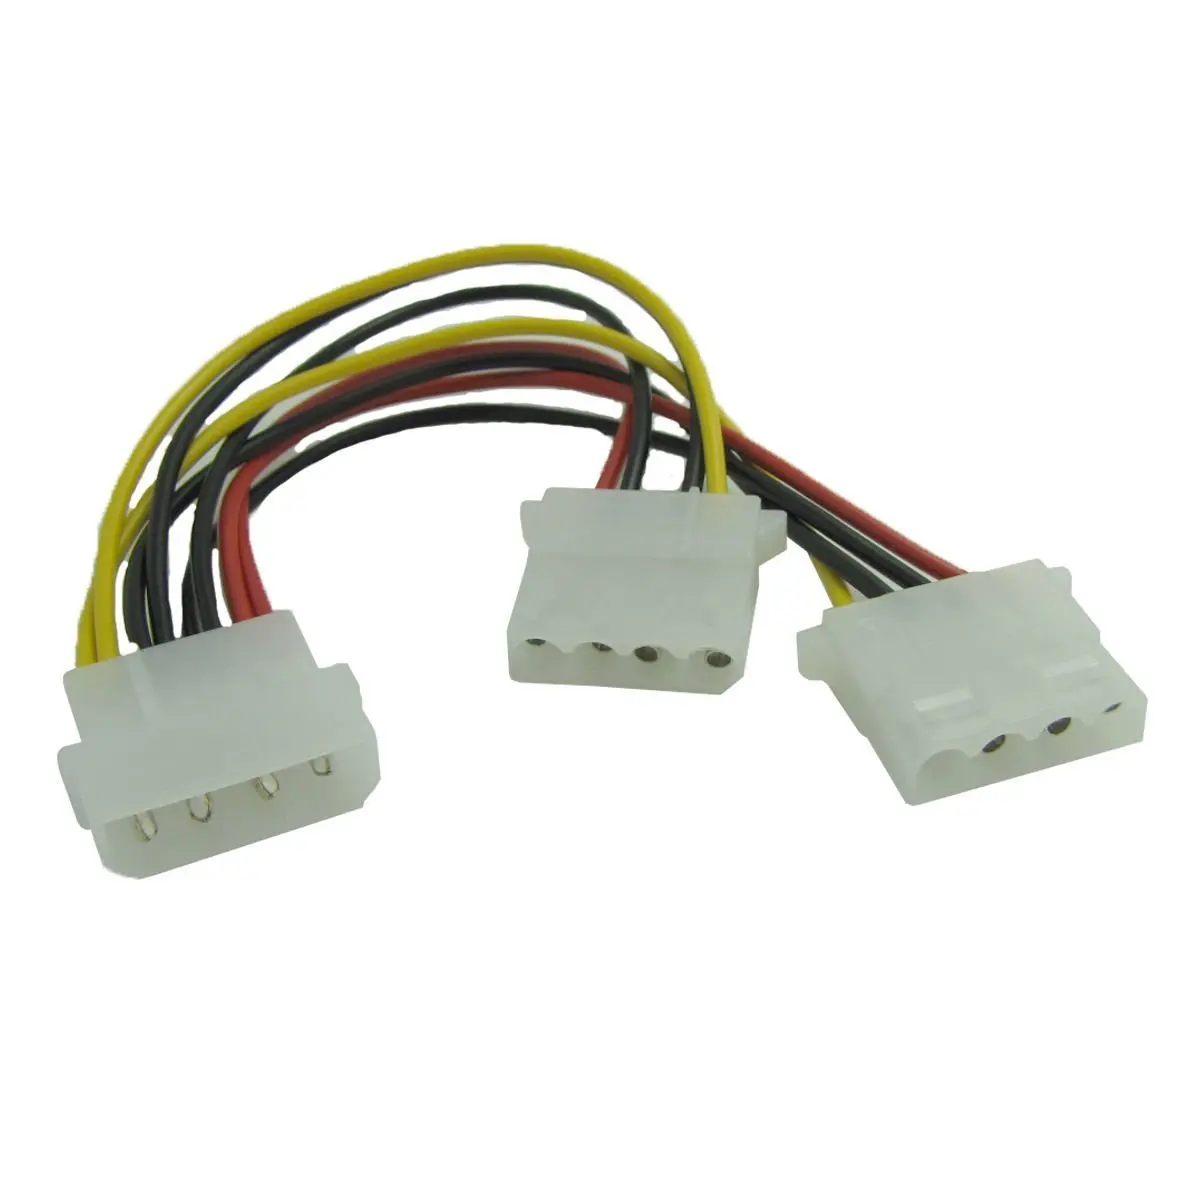 download molex pinout for free